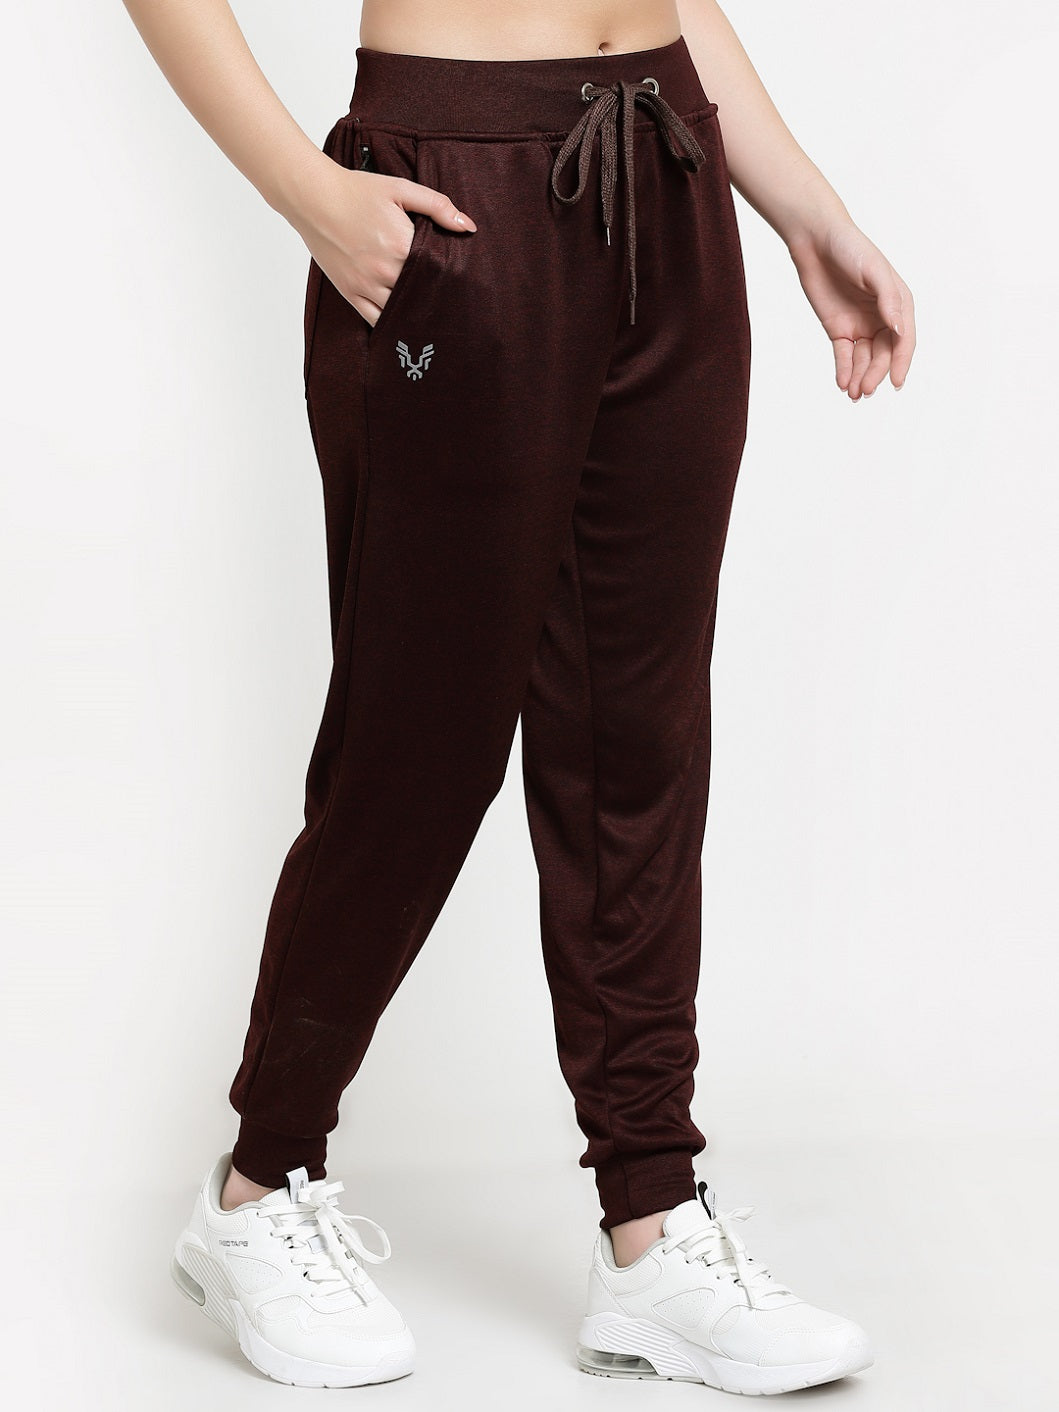  Womens Track Pants with Pockets Women Casual Long